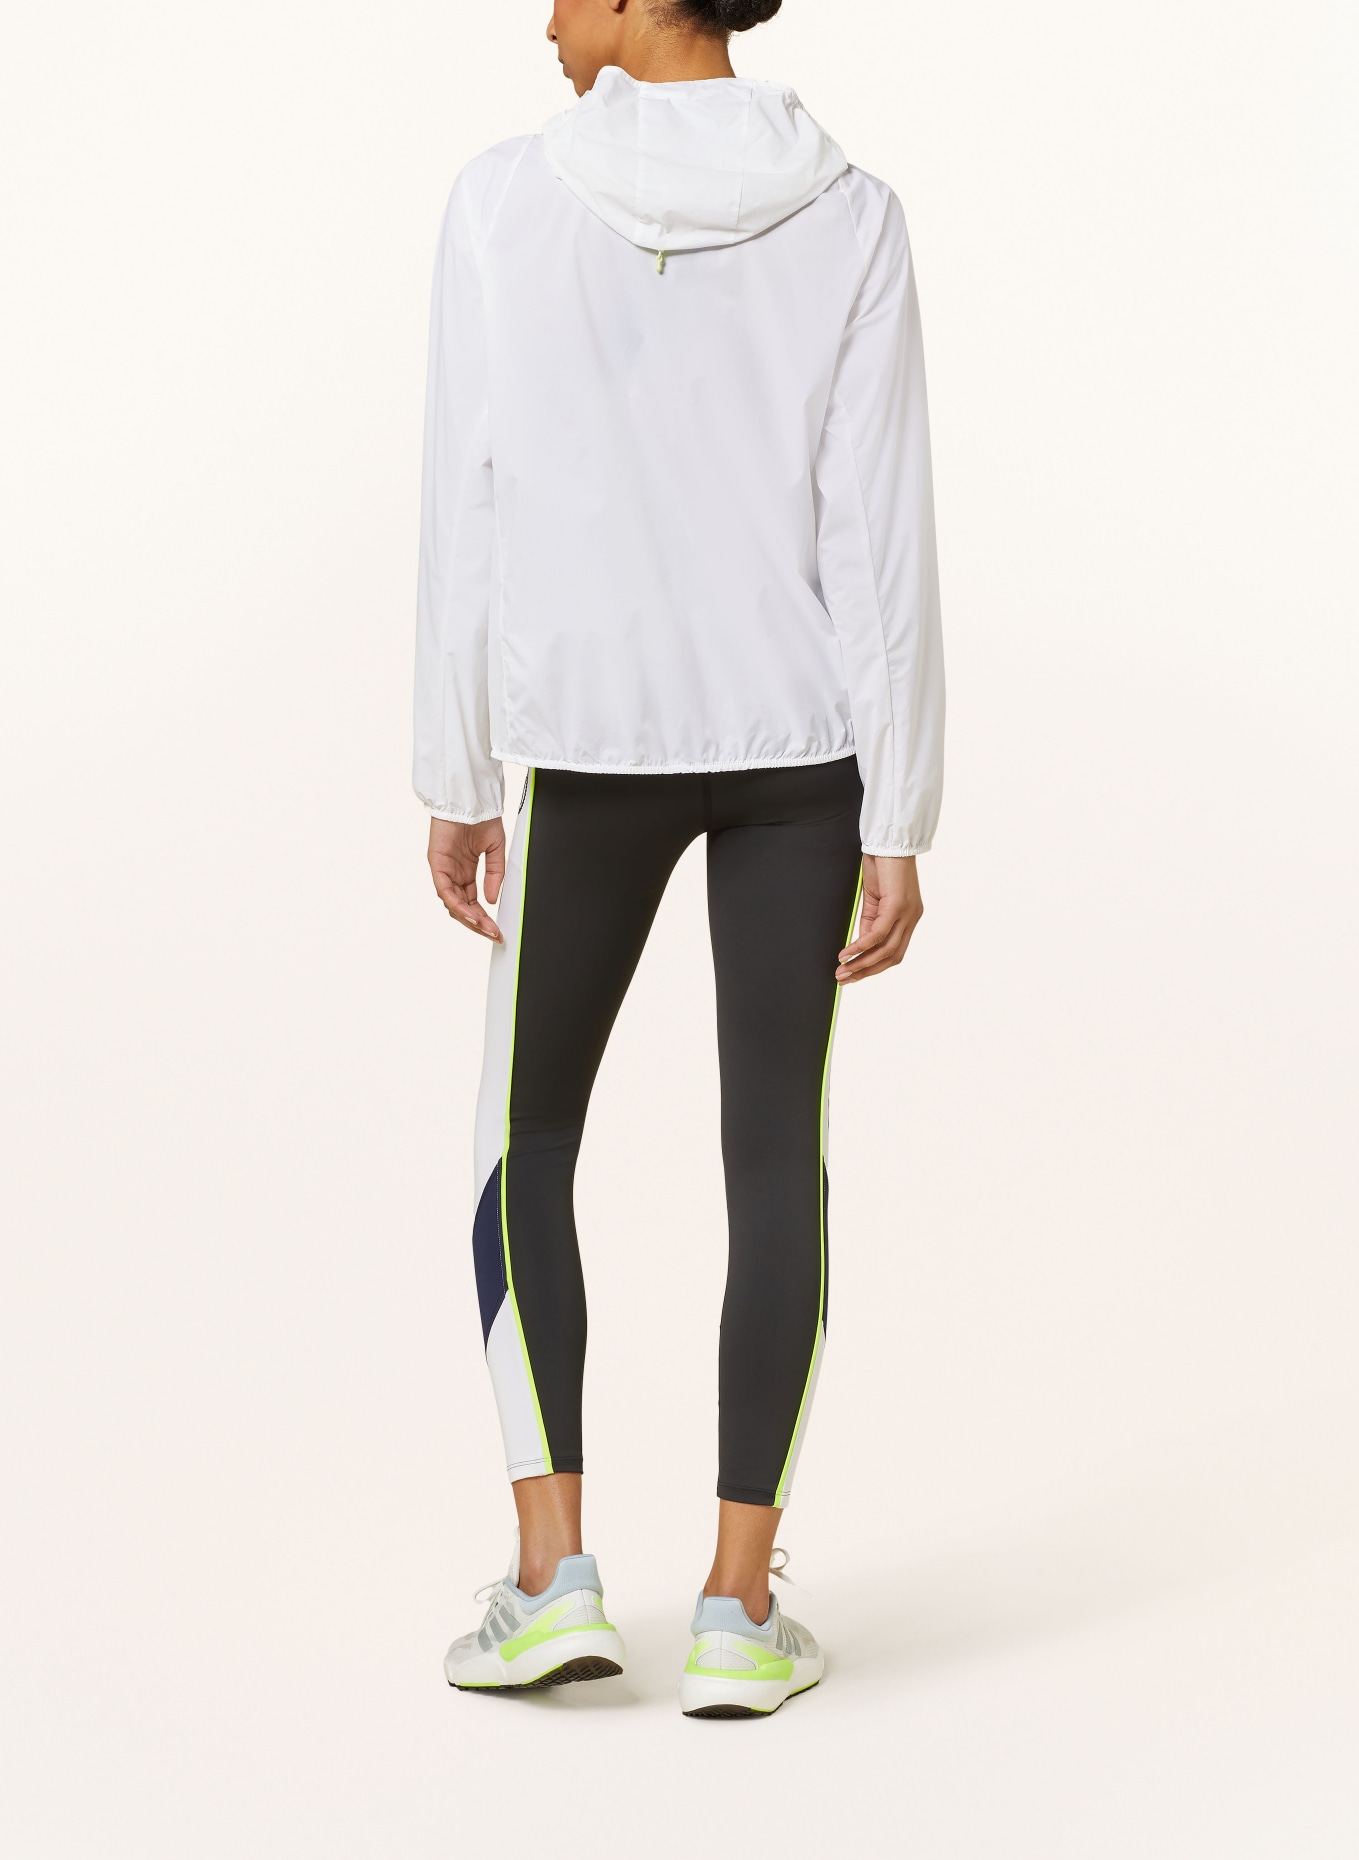 UNDER ARMOUR Running jacket PHANTOM, Color: WHITE/ NEON GREEN (Image 3)